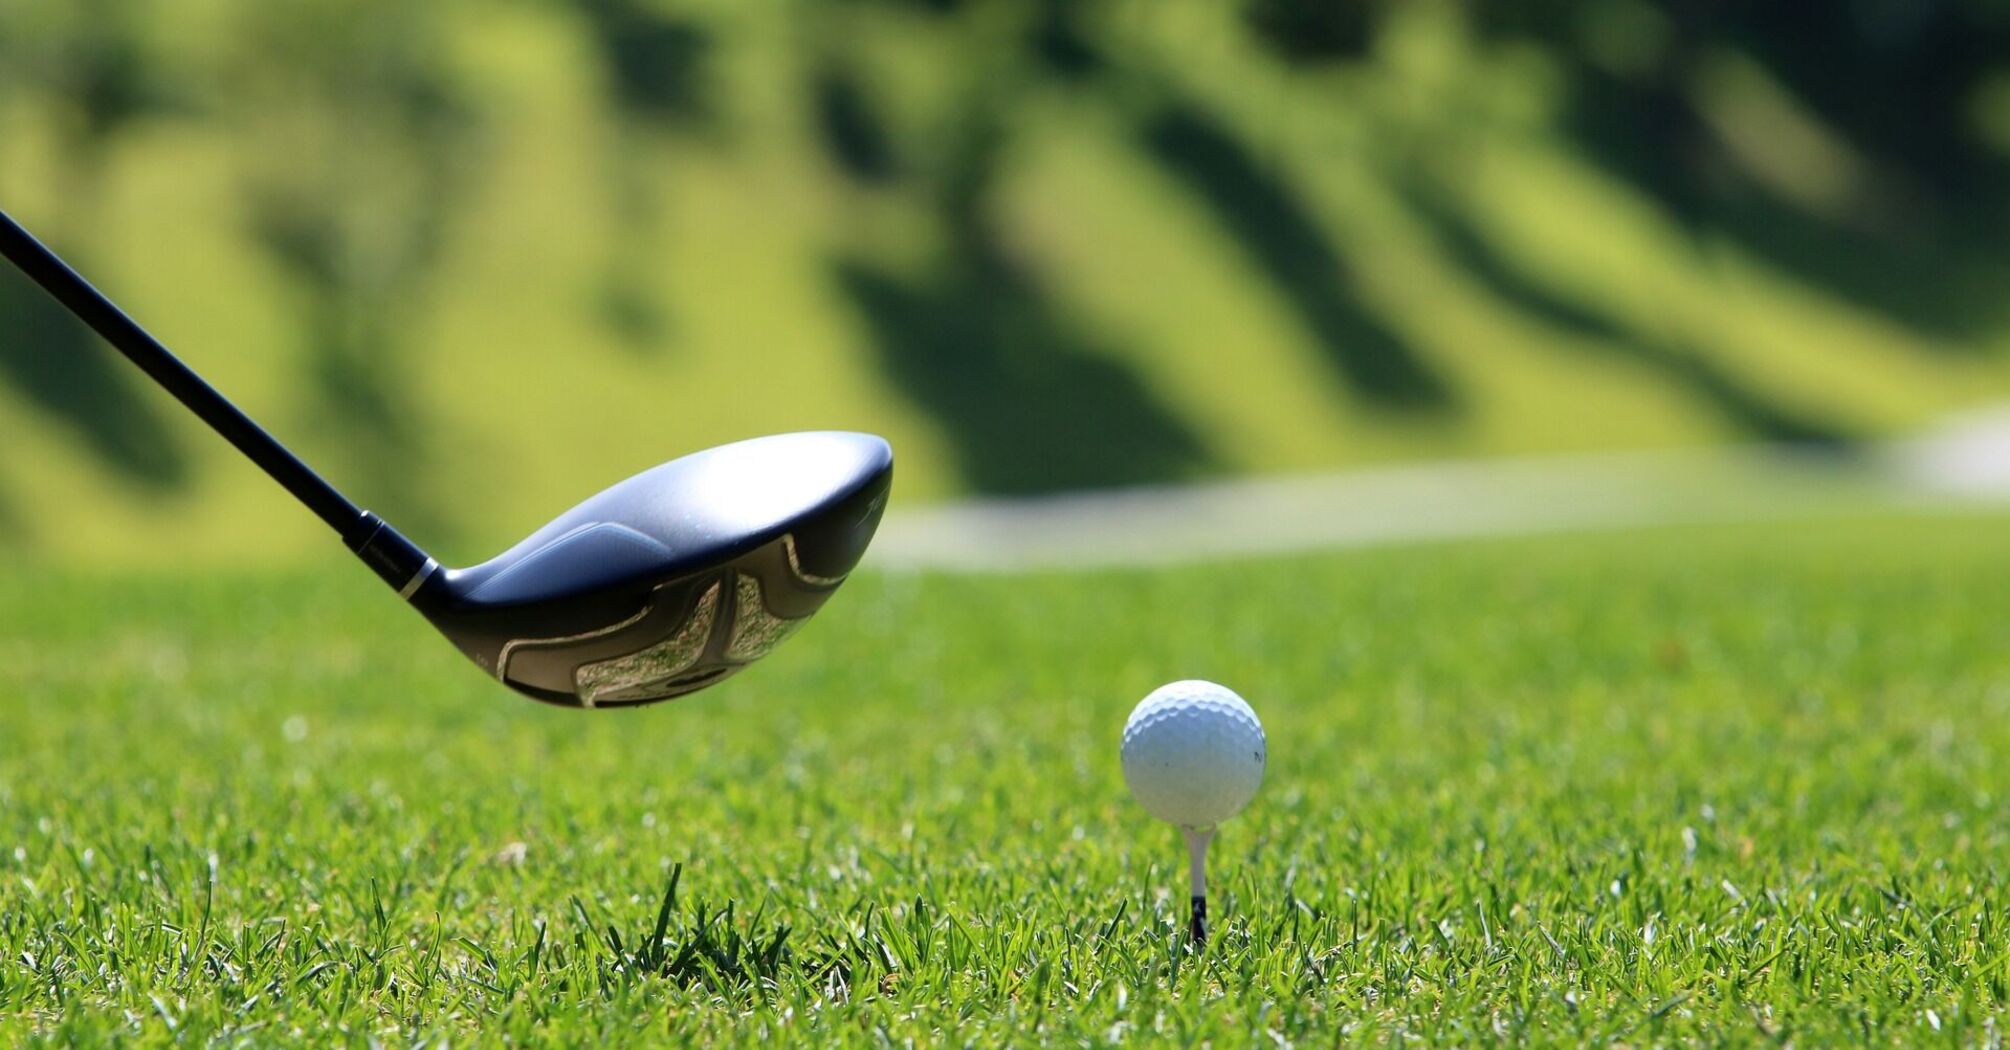 Close-up of a golf club about to hit a golf ball on a lush course